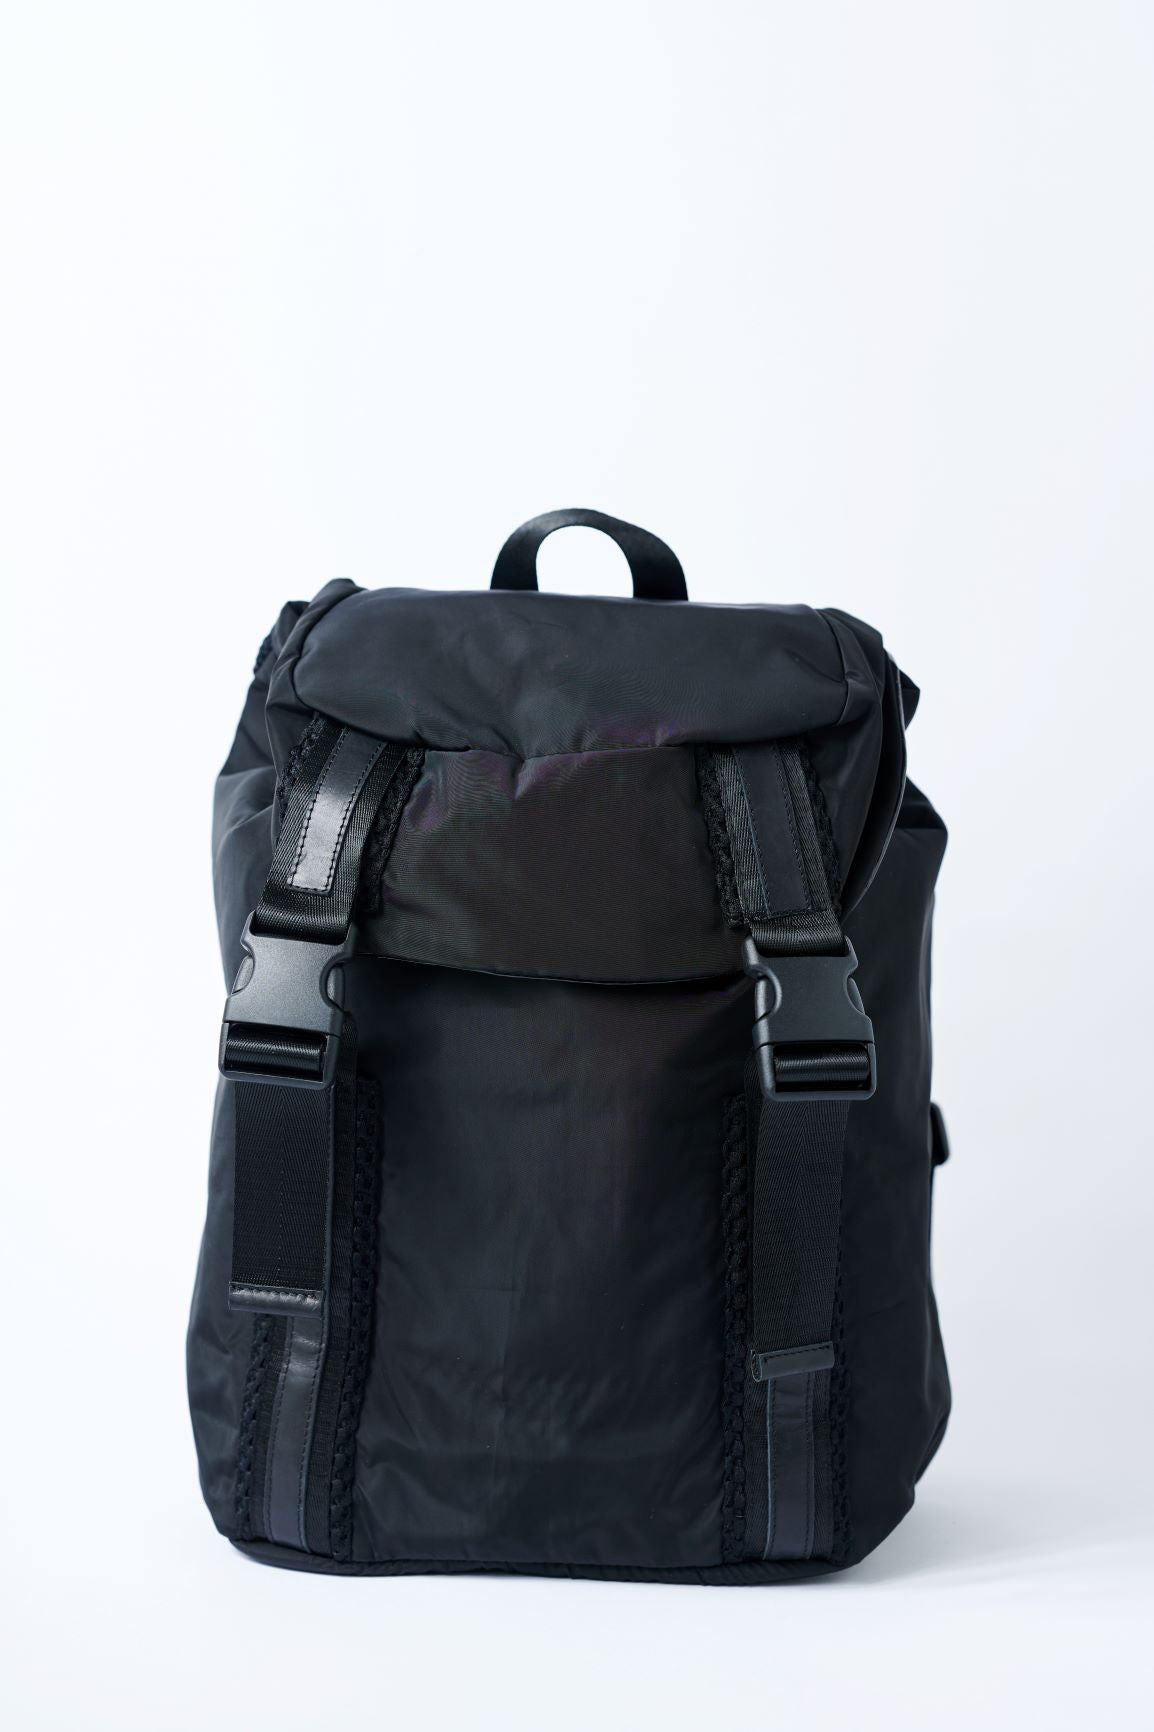 Black nylon flap top backpack with mesh and leather trim details and glossy black lining. 